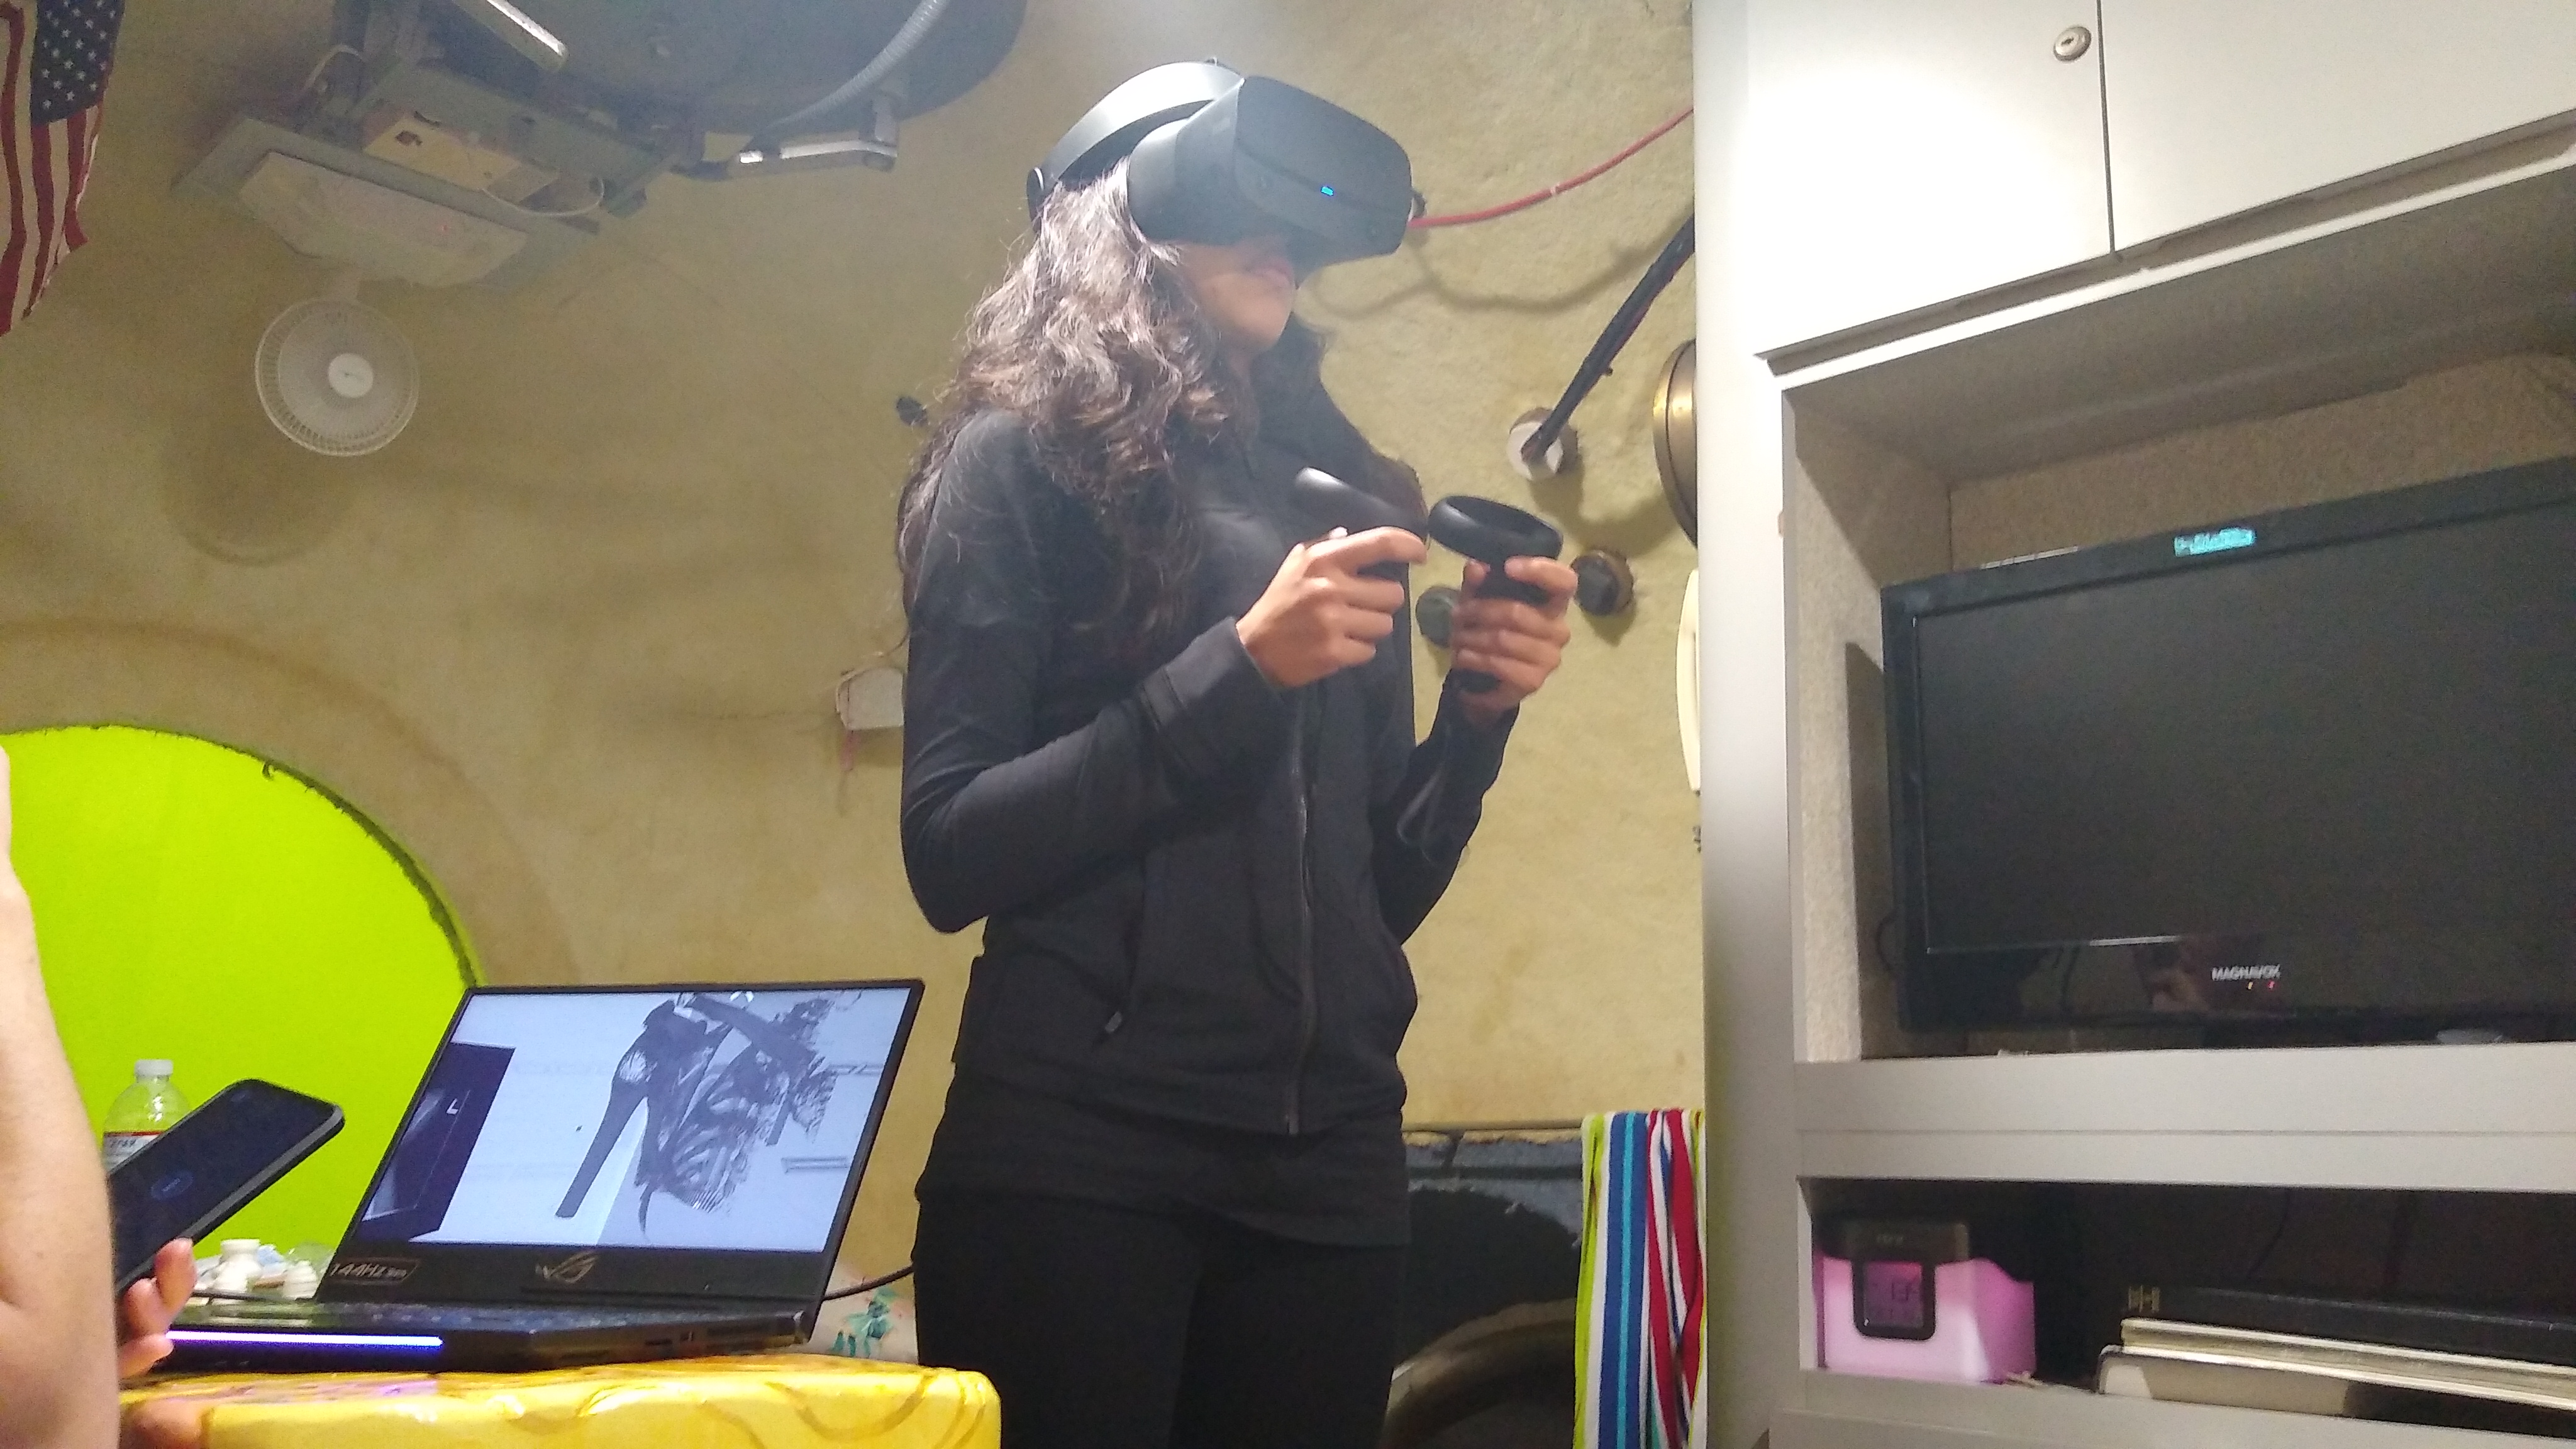 Female wearing a virtual reality headset and holding controller.